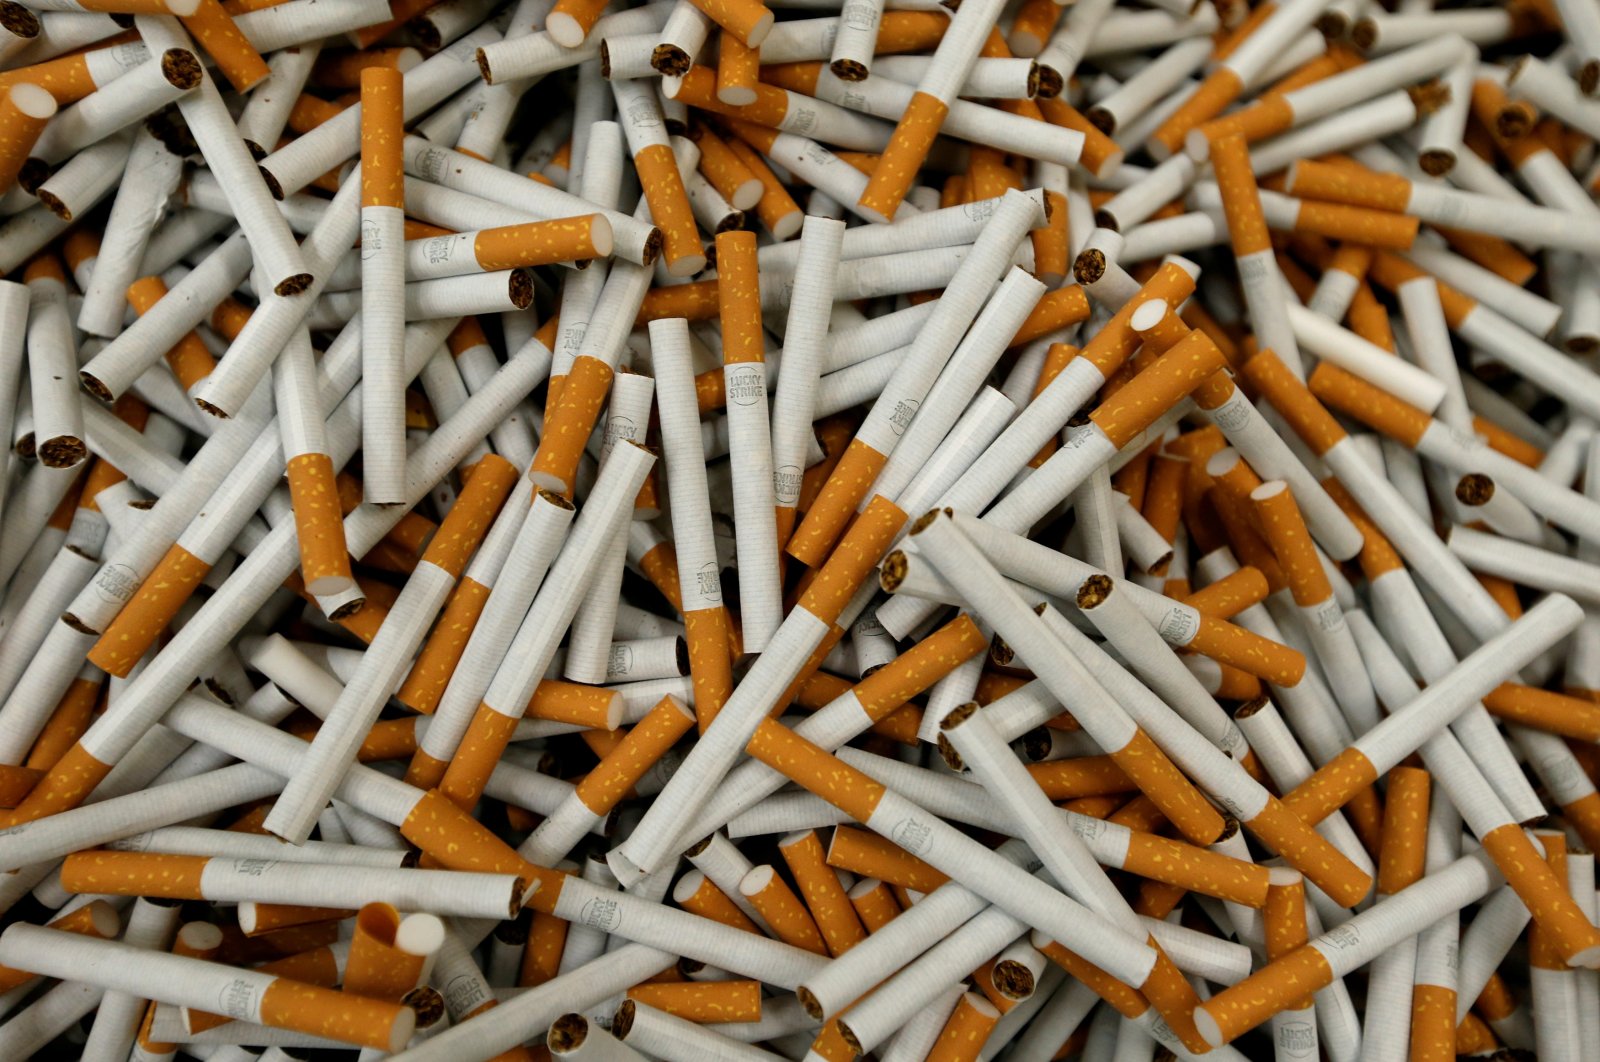 Lucky Strike cigarettes are seen during the manufacturing process in the British American Tobacco Cigarette Factory (BAT) in Bayreuth, Germany, April 30, 2014. (REUTERS/Michaela Rehle/File Photo)